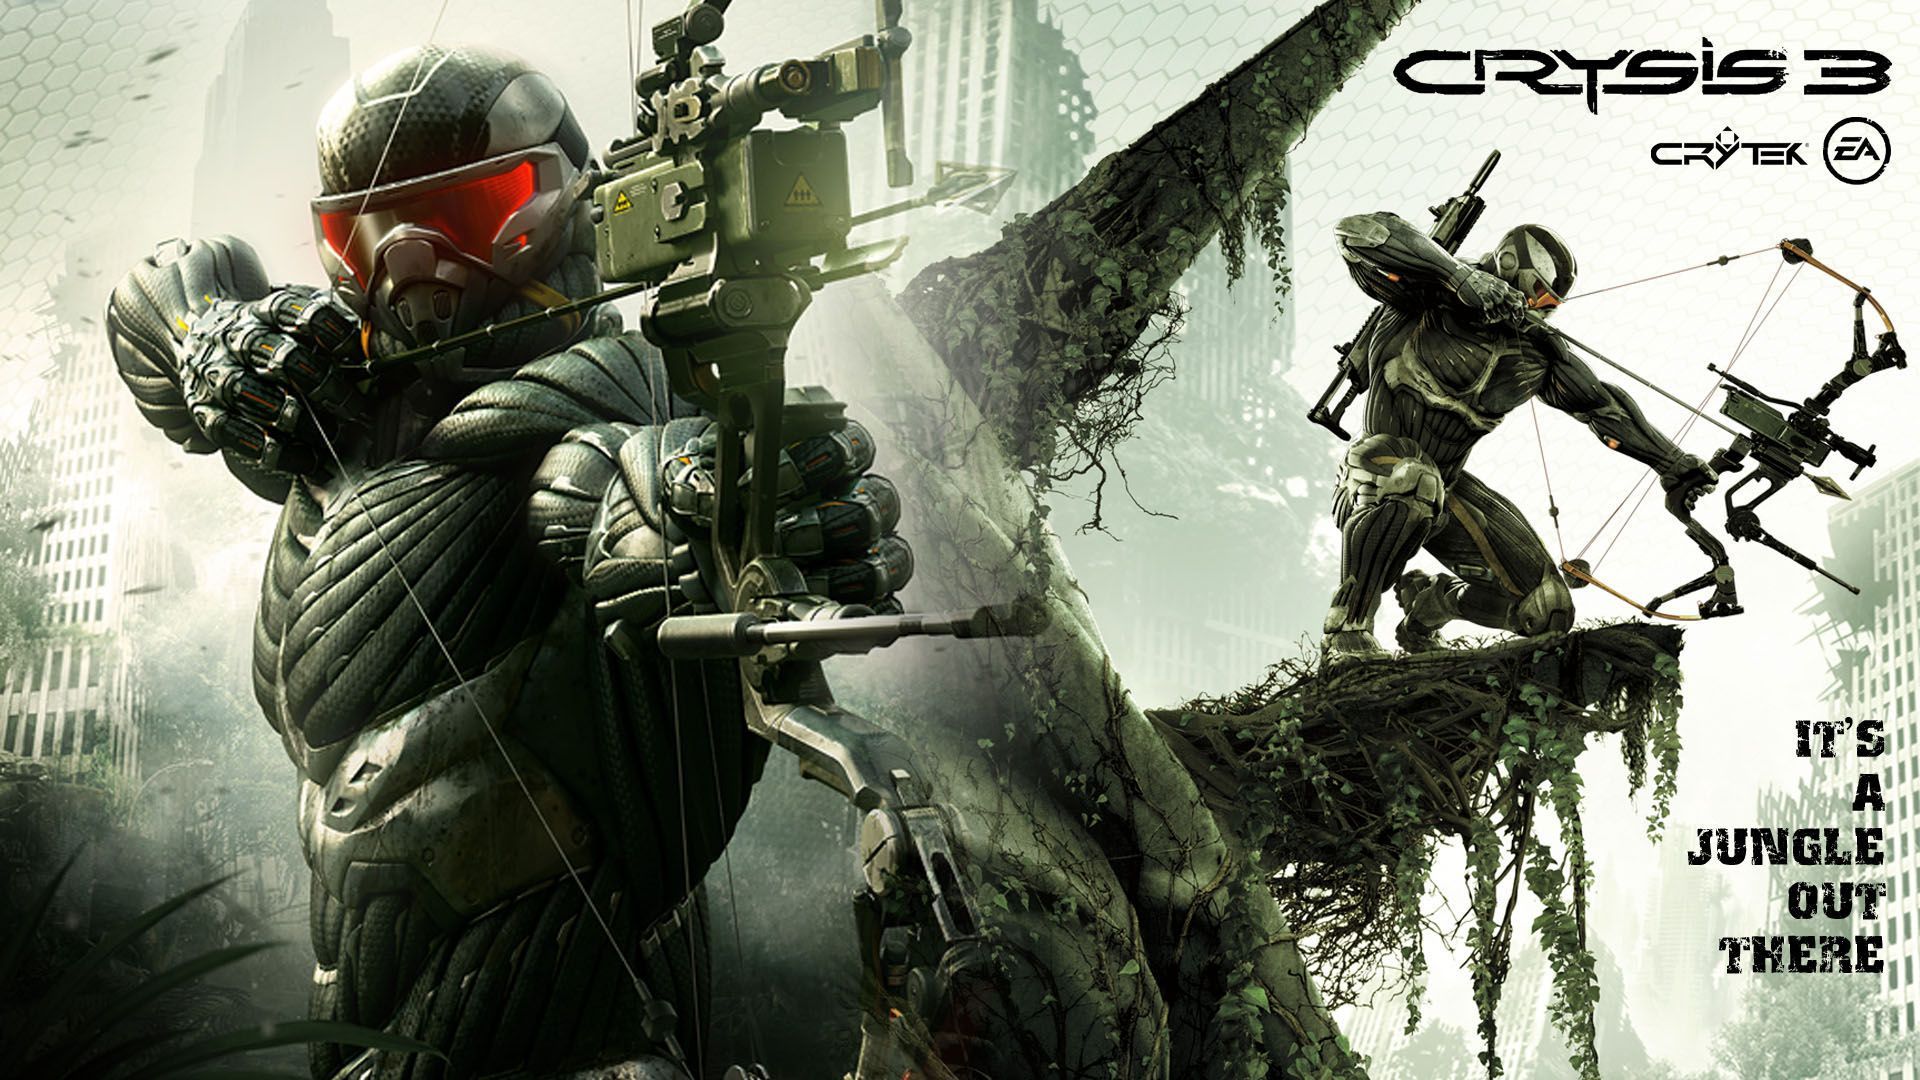 Gallery for - crysis 2 wallpapers full hd